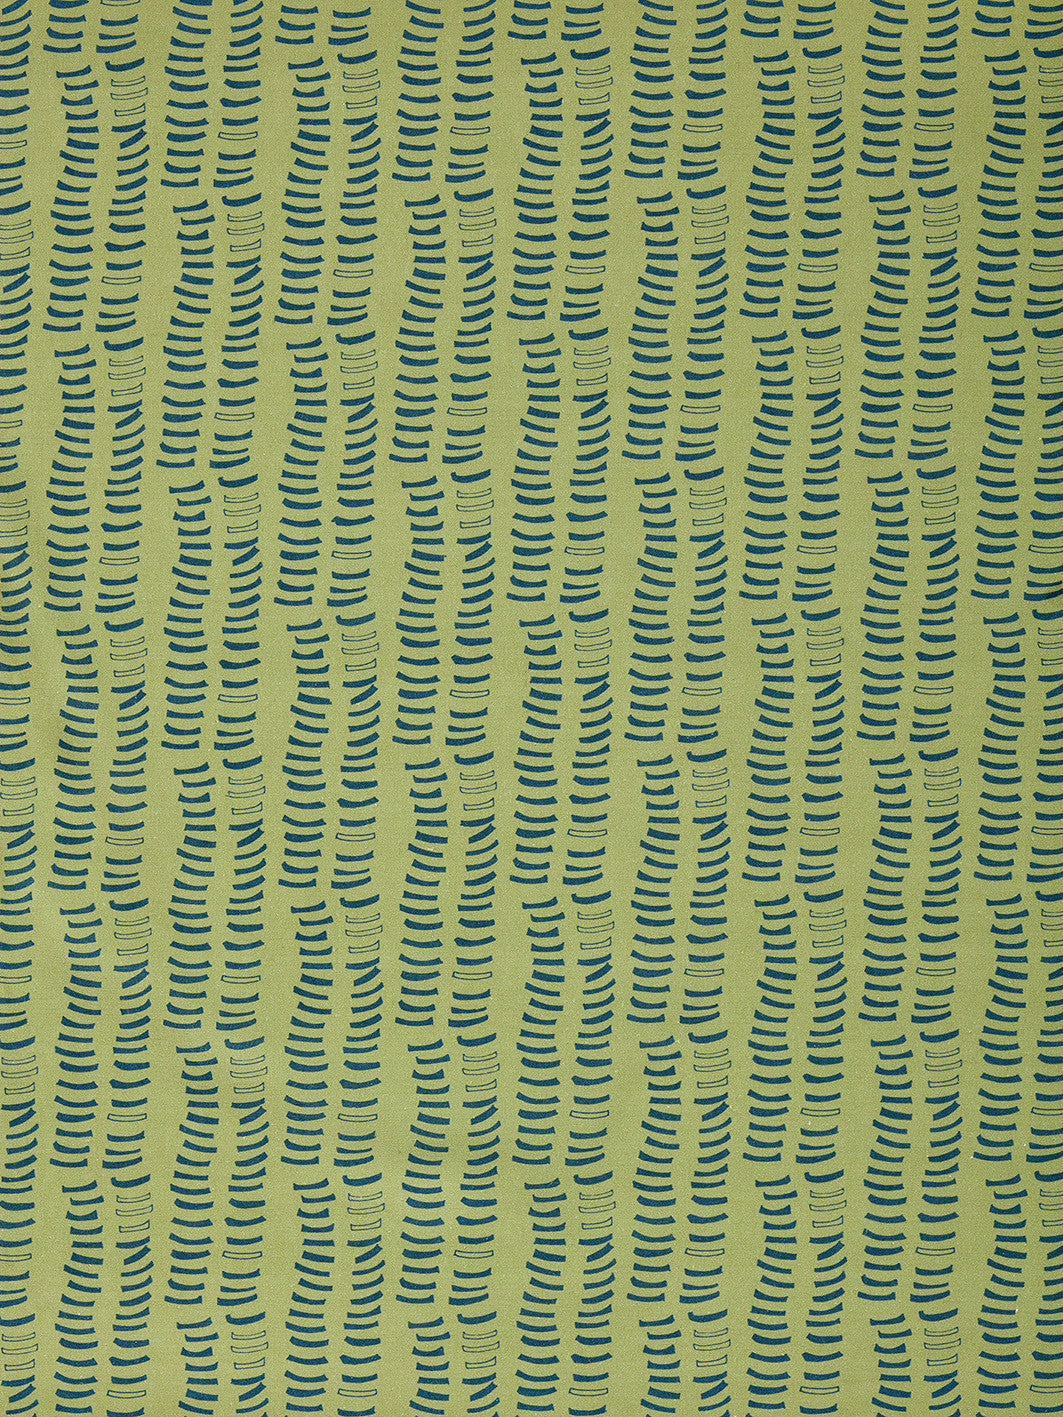 Graphic Rib Pattern Pattern Screen Printed Linen Cotton Canvas Home Decor Curtain blind upholstery Fabric in Antique Moss Green and Dark Petrol Blue Canada USA